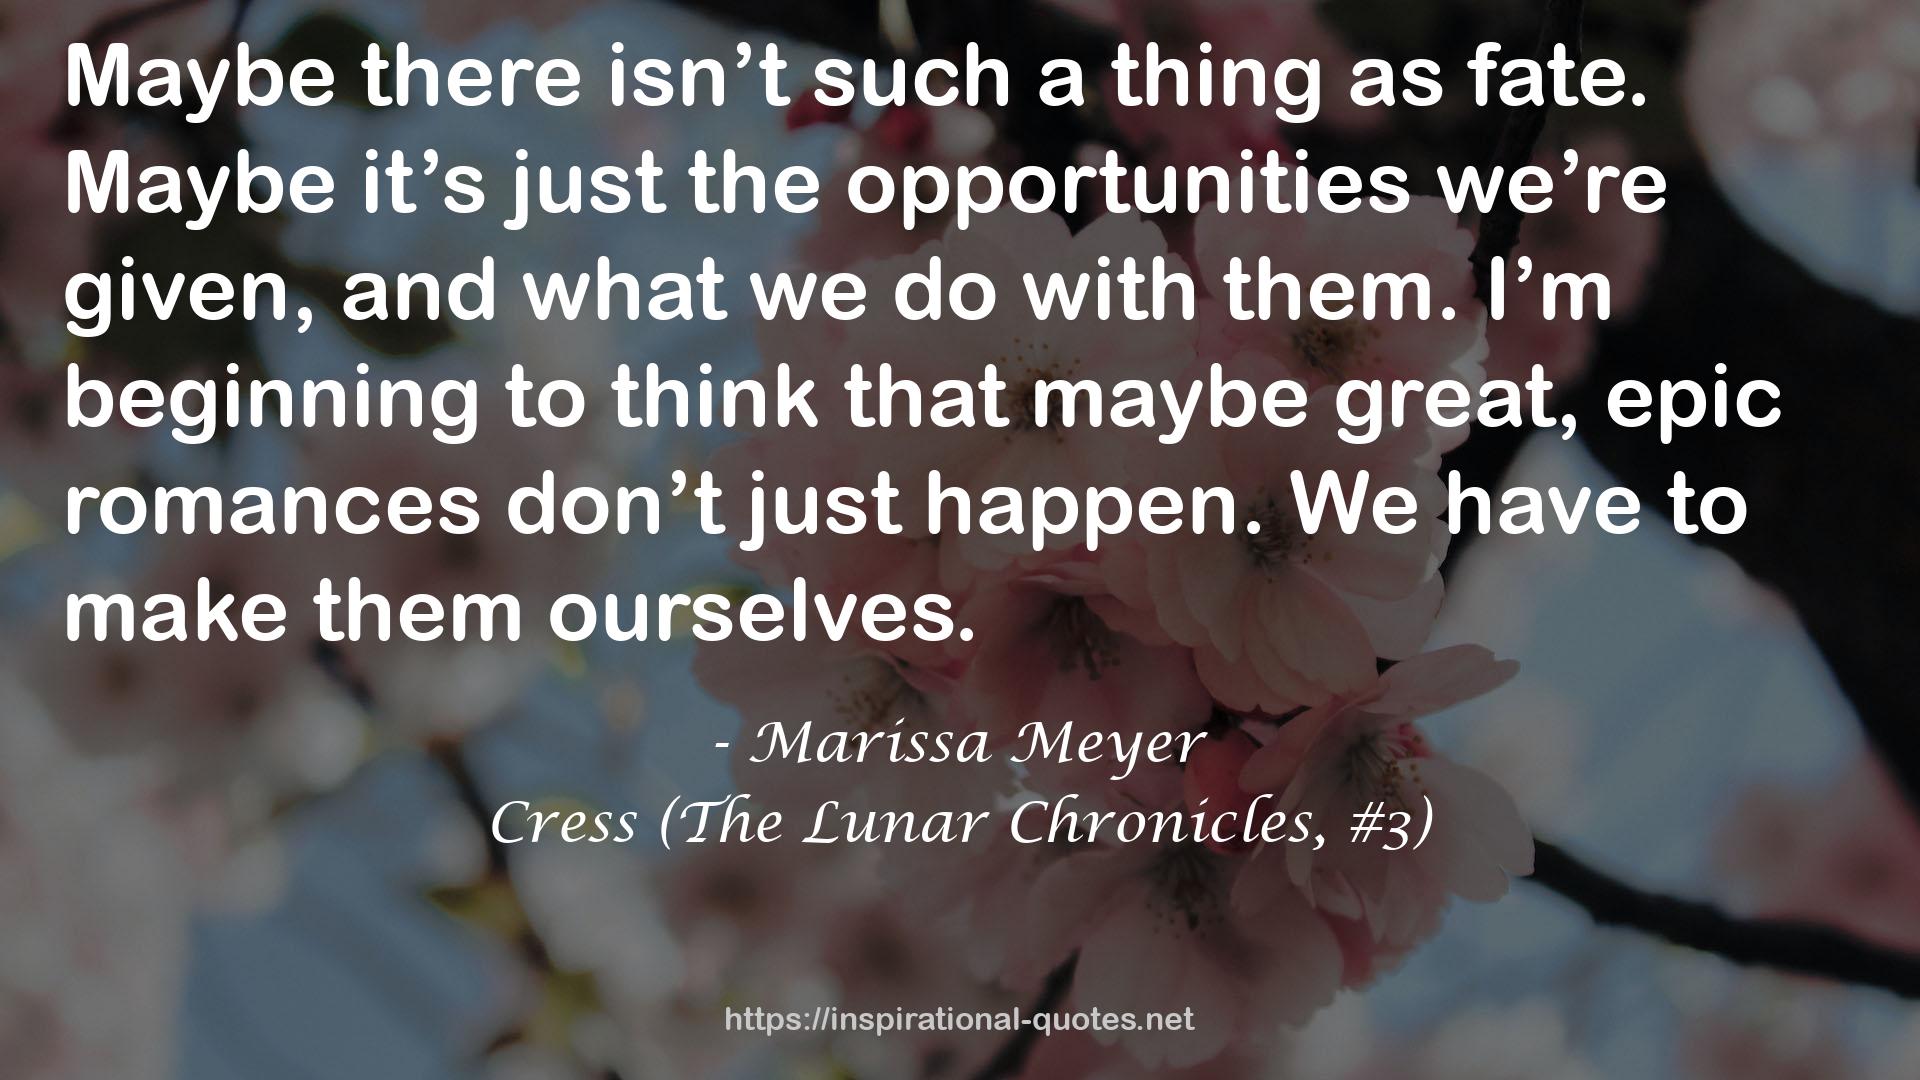 Cress (The Lunar Chronicles, #3) QUOTES